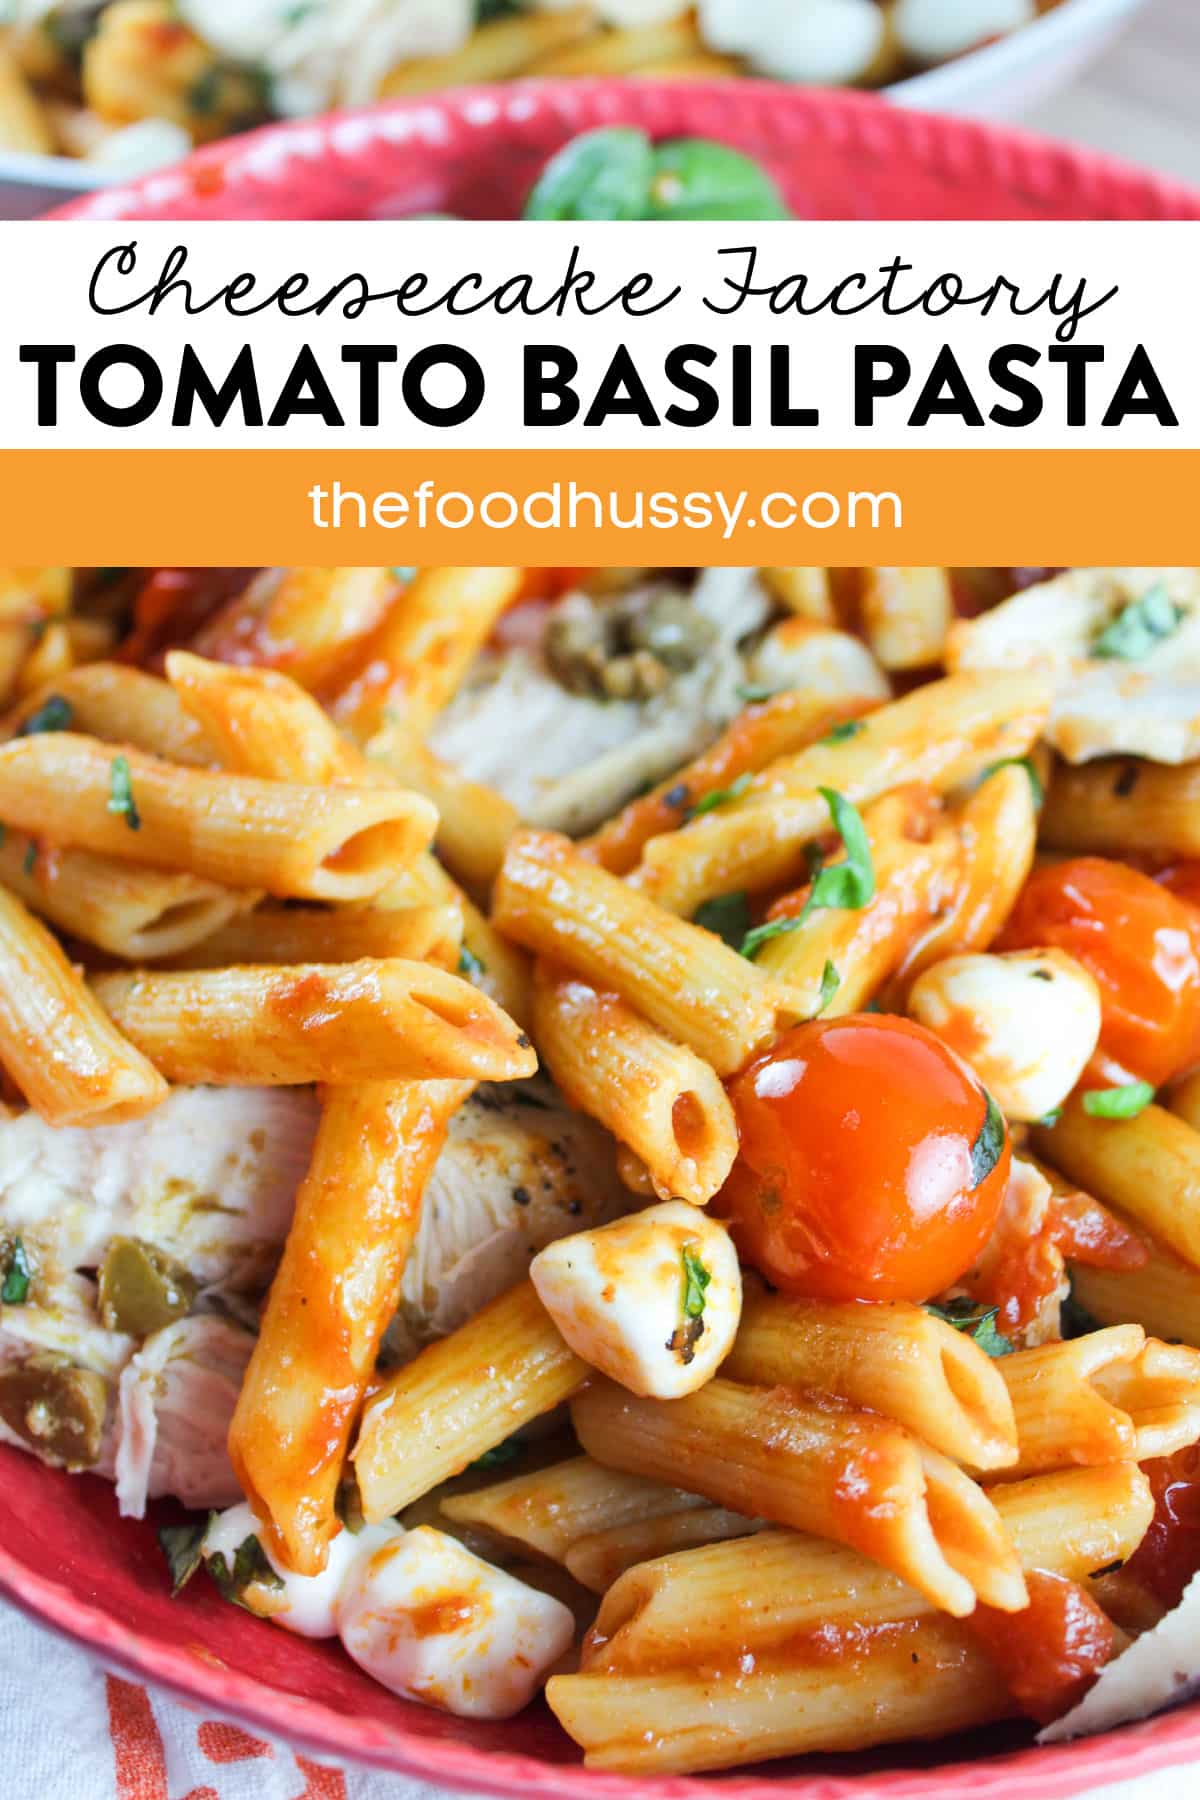 The Cheesecake Factory Tomato Basil Pasta is one of my favorite dishes! Loaded with fresh tomatoes, fresh mozzarella pearls and fresh basil - then topped with lightly seasoned grilled chicken. via @foodhussy